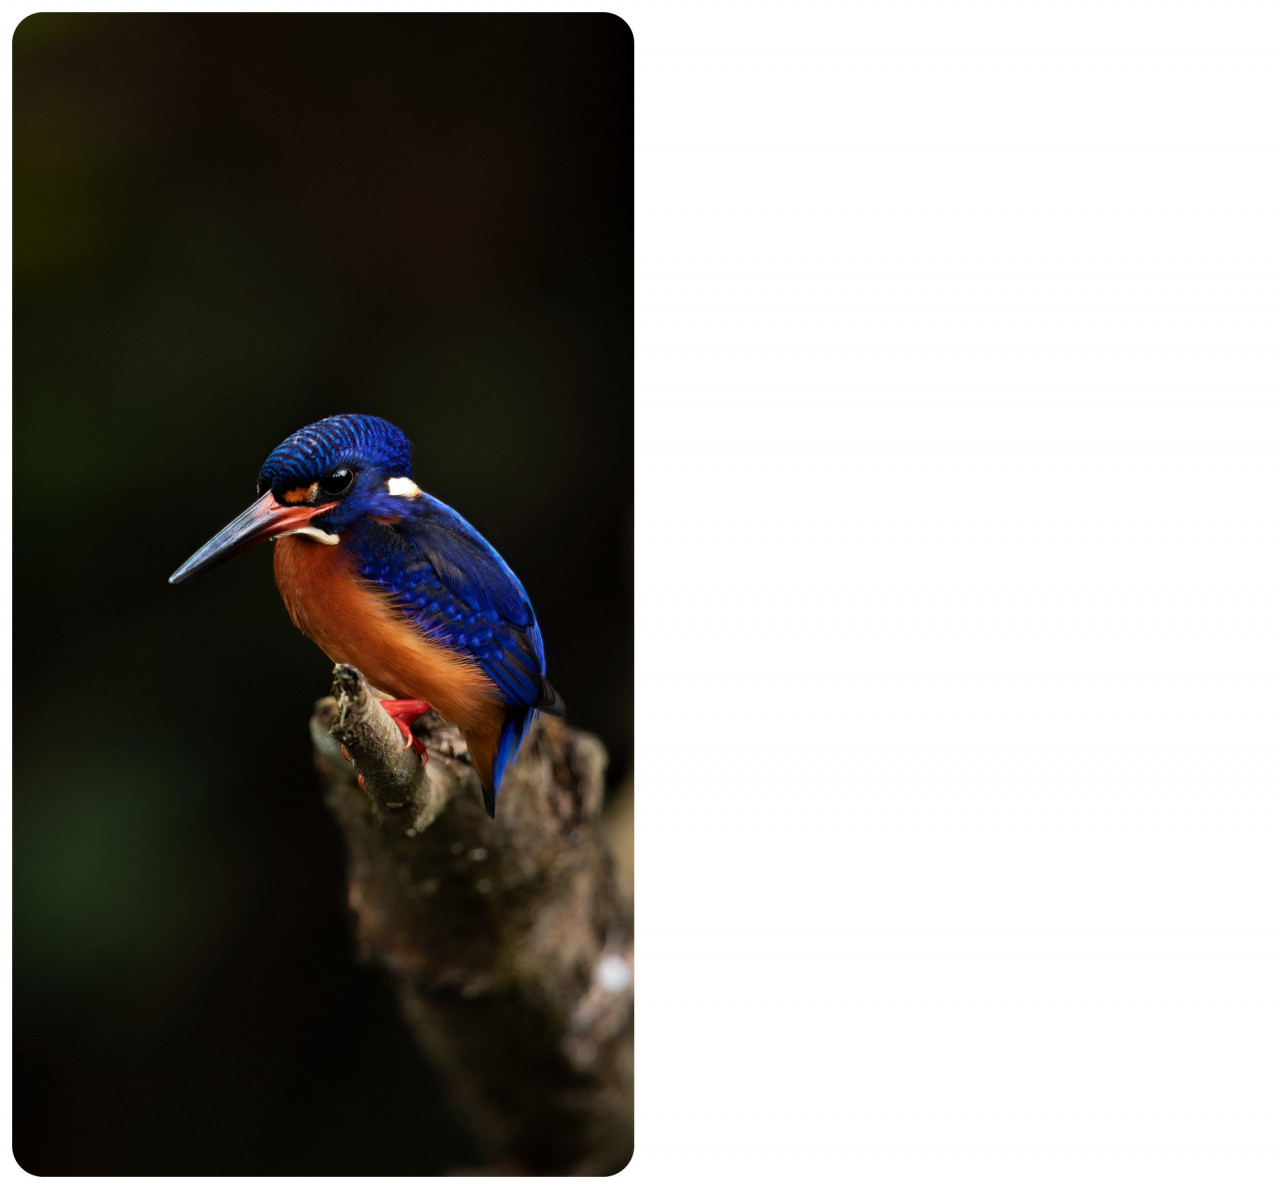 The Blue-Eared Kingfisher is perfectly adapted to fishing in streams and rivers. It sits in the shadows of the canopy where its brilliant shades of blue blend into the shadows while it waits for unsuspecting prey in the waters below. They can still be found in waterways around the Klang Valley which is why our river systems must be kept clean. – Pic courtesy of Peter Ong